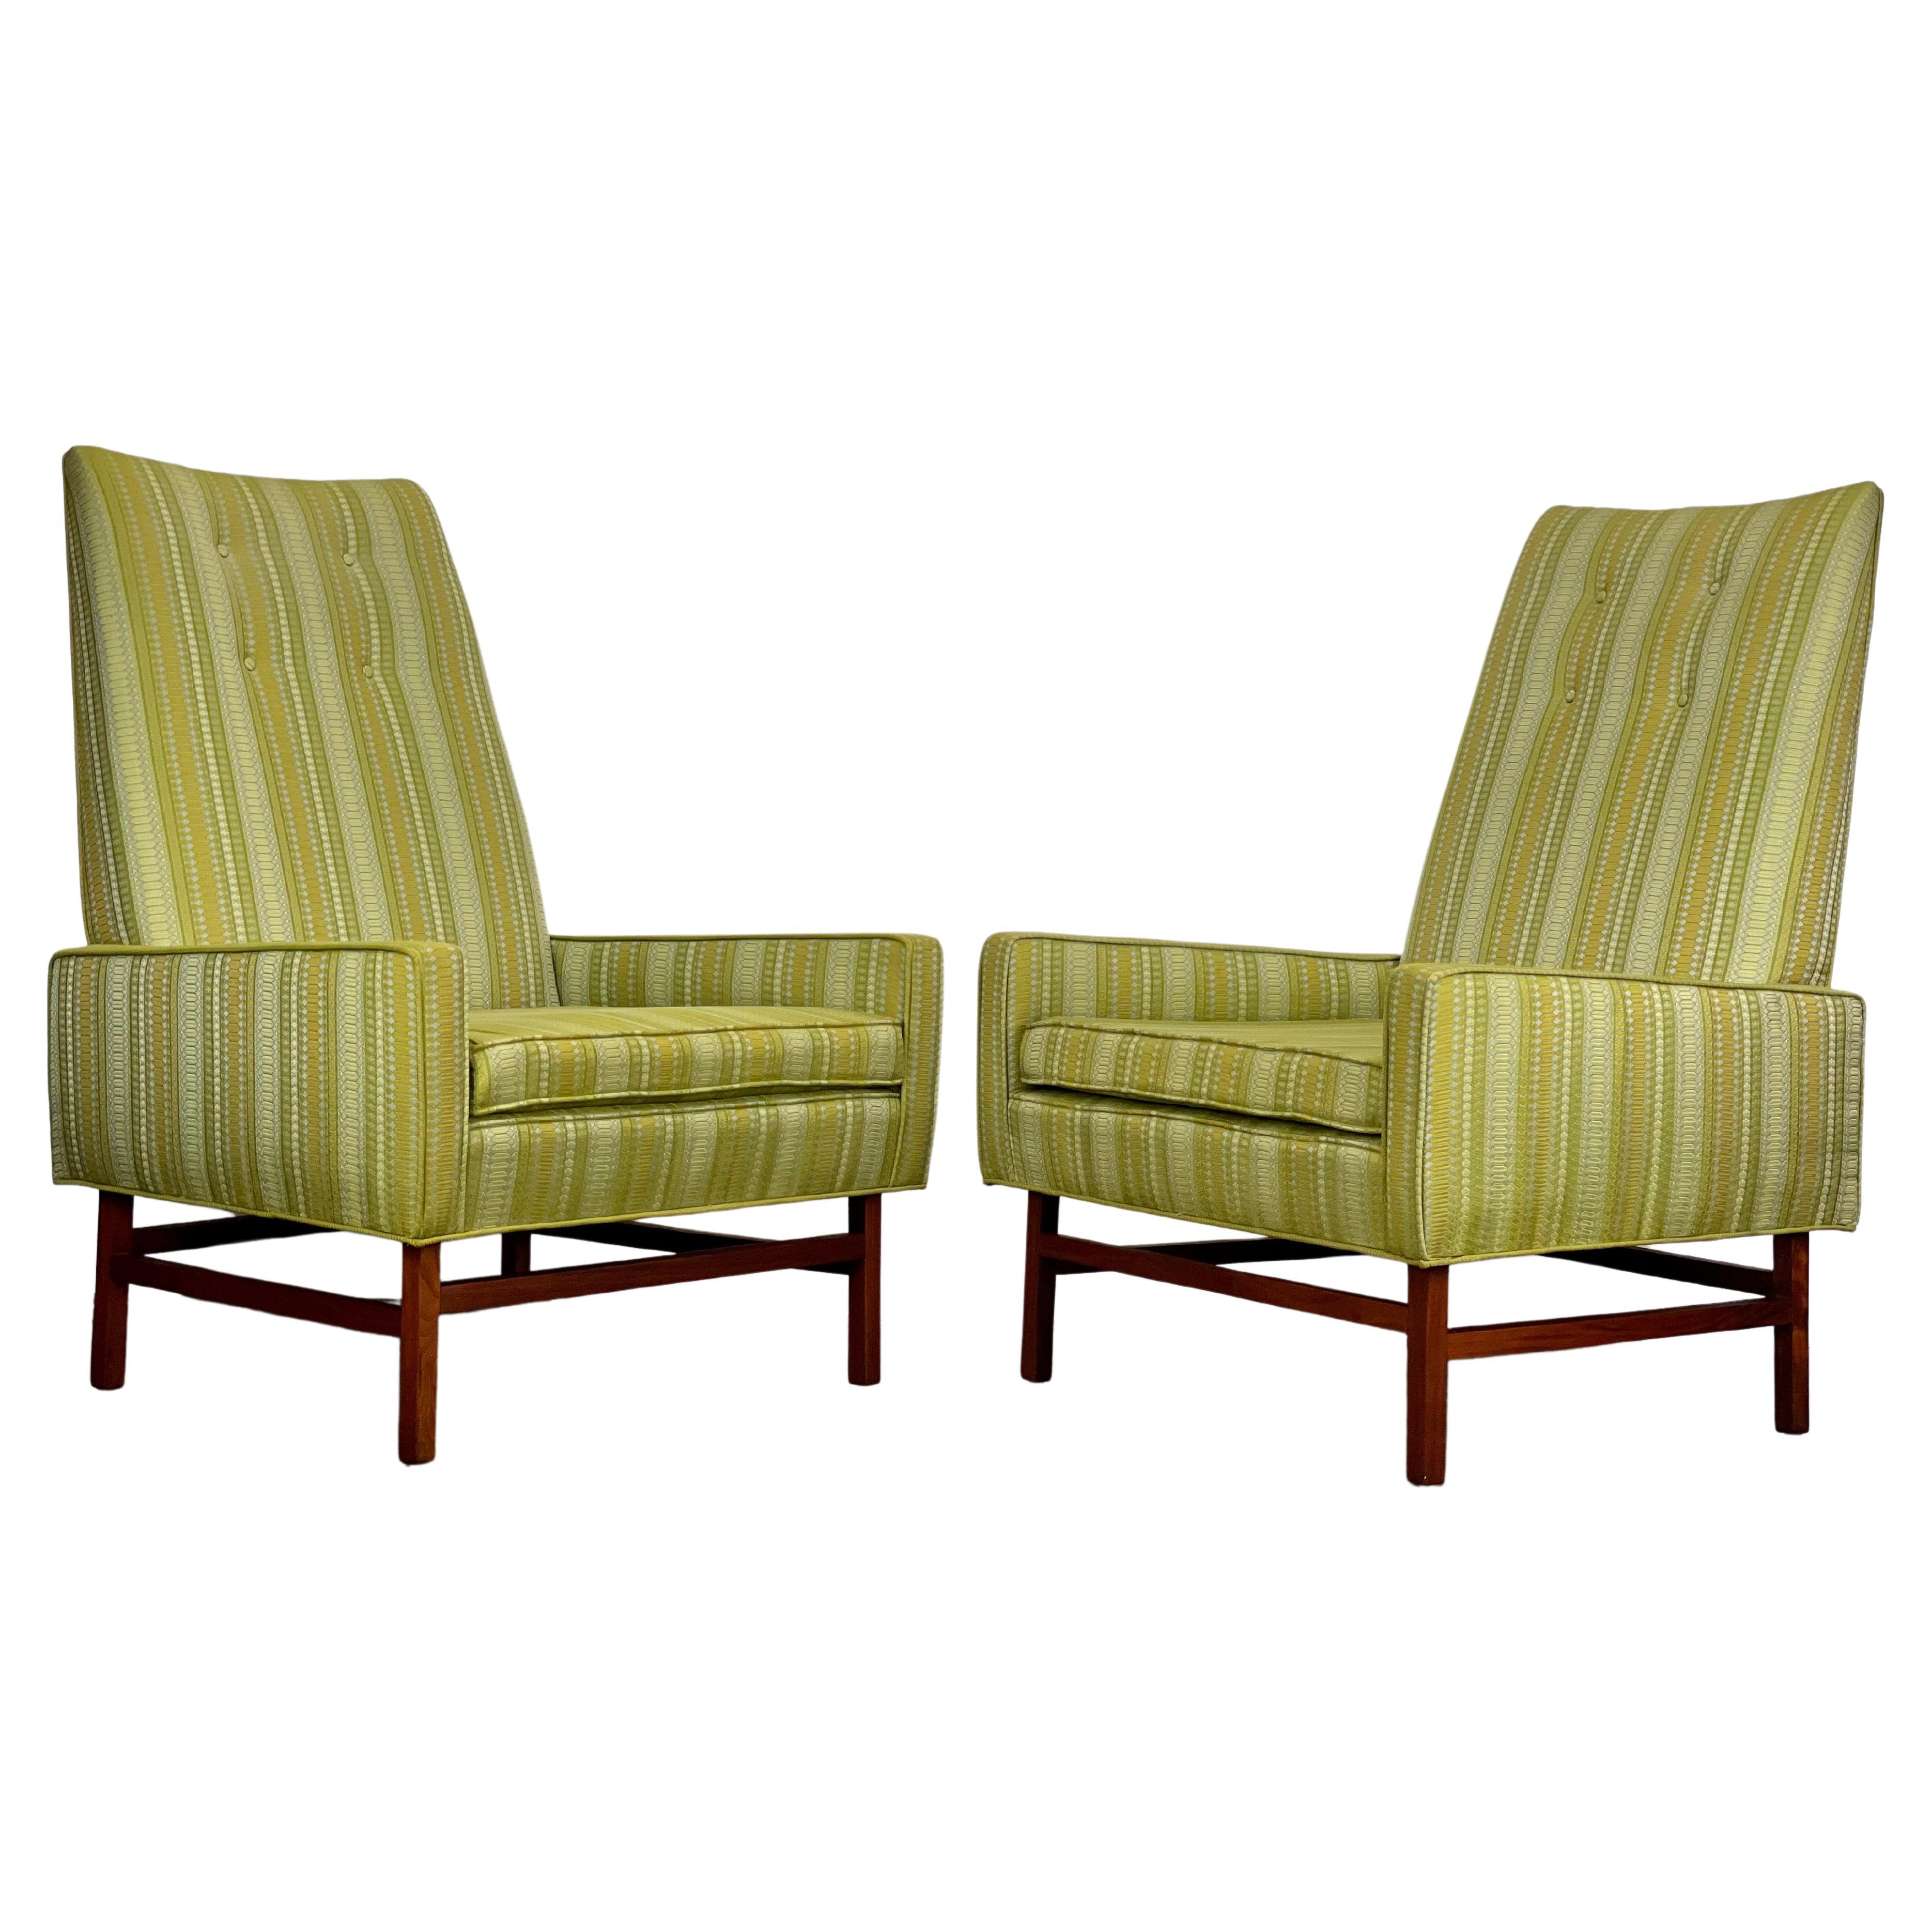 Throne Chairs in Alexander Girard Fabric by Edward Axel Roffman for B. Altman's 